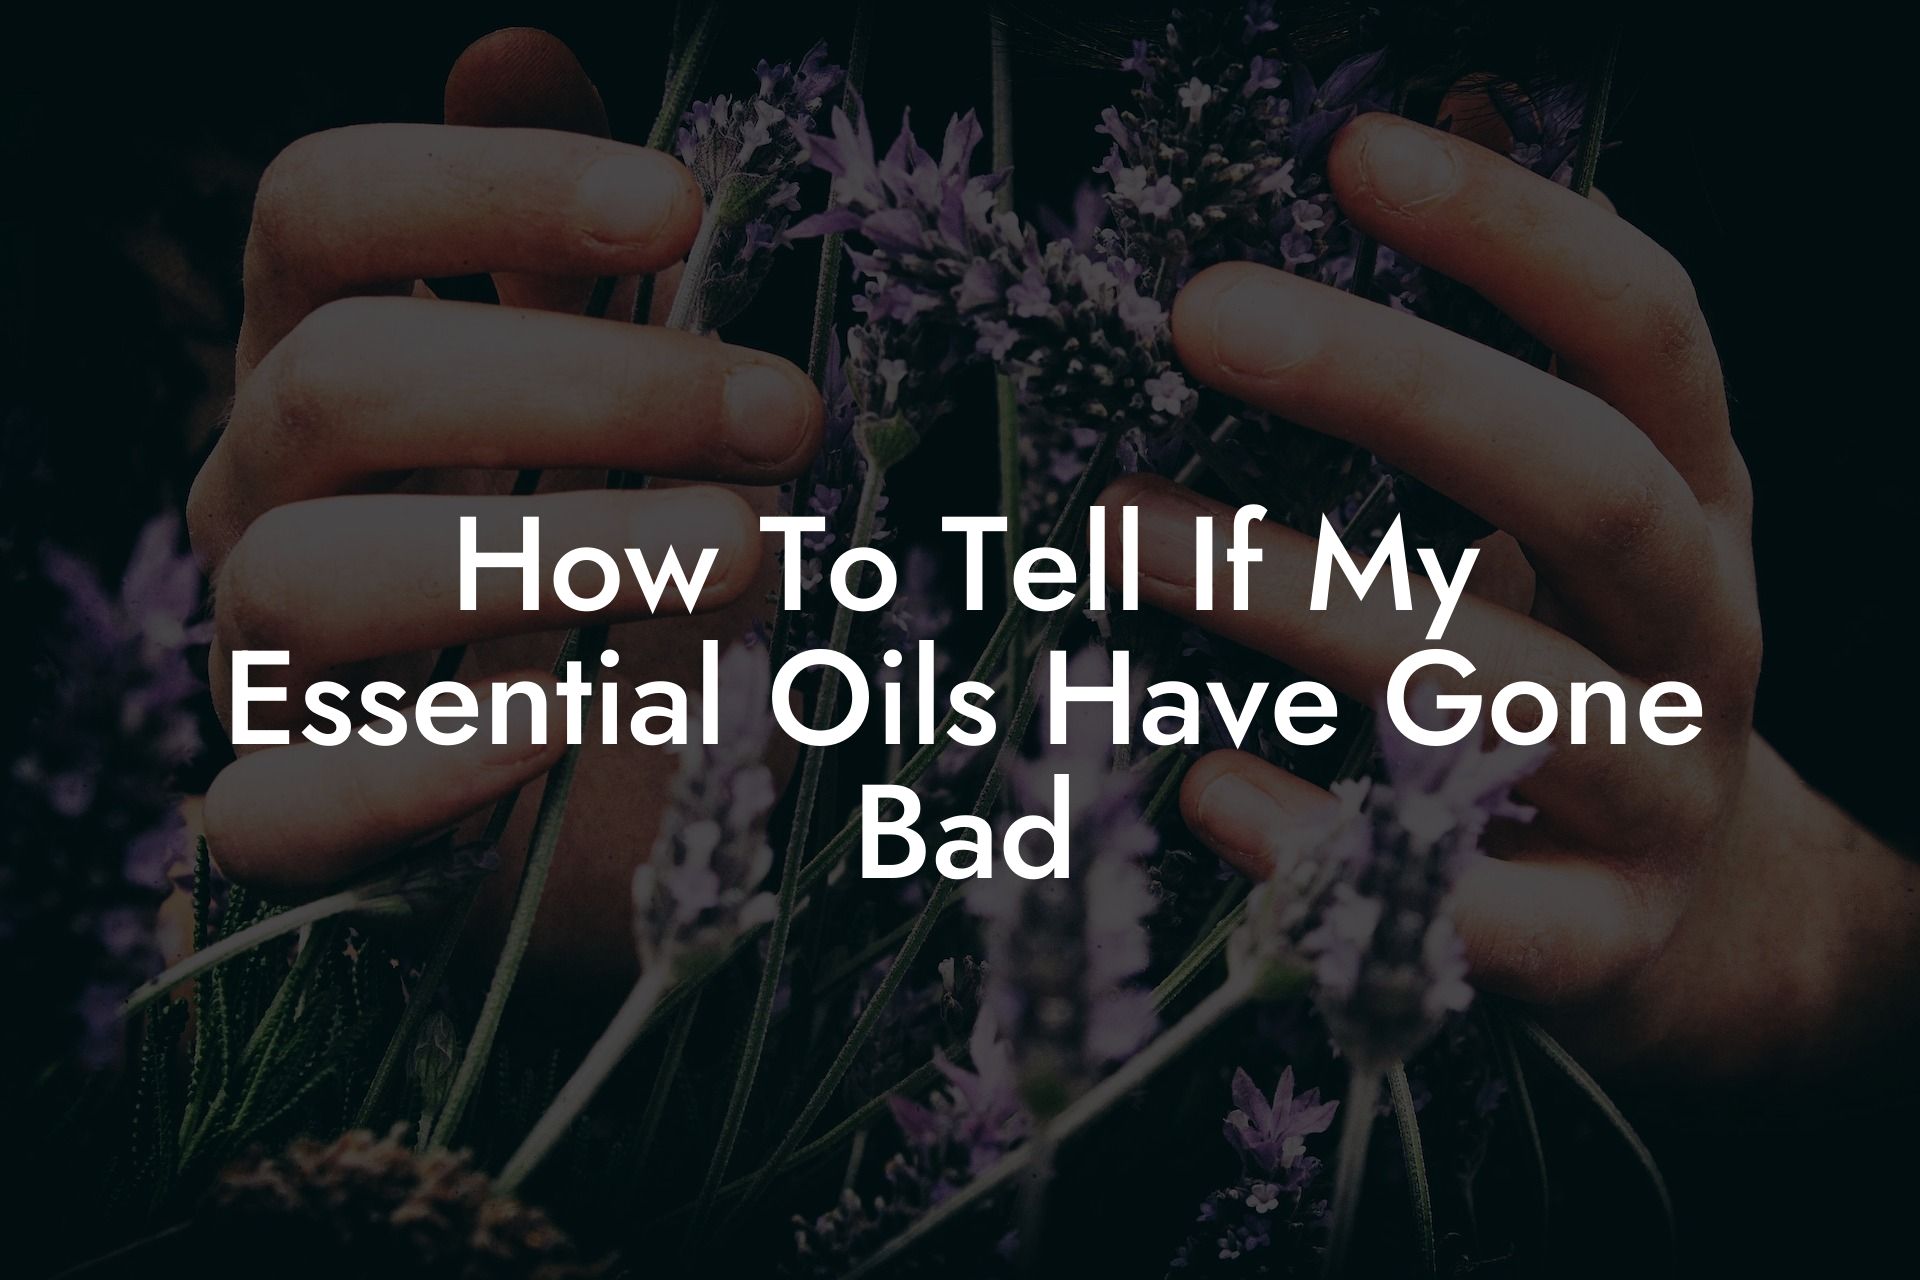 How To Tell If My Essential Oils Have Gone Bad